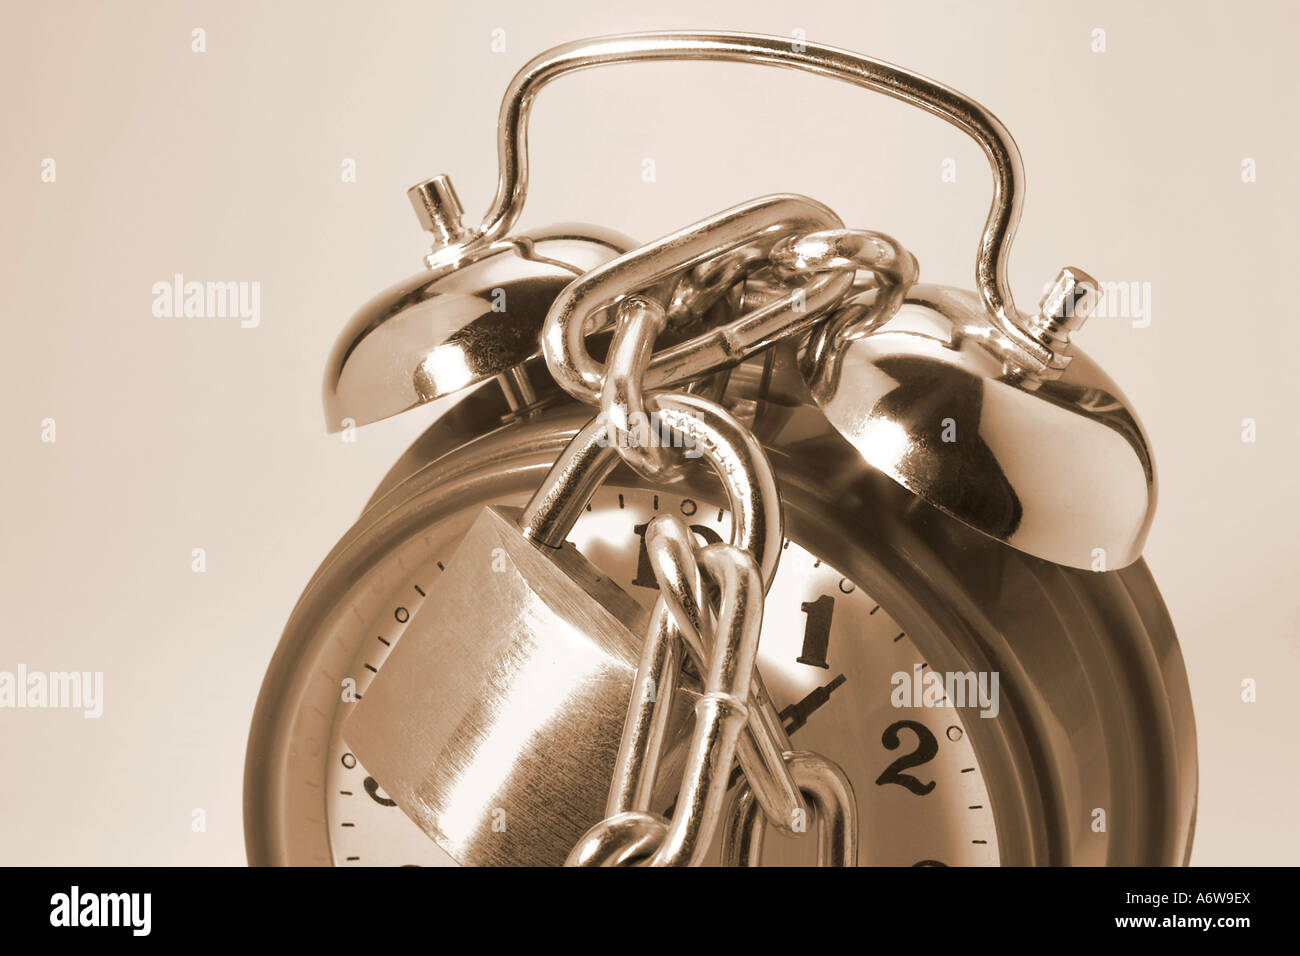 Alarm Clock with Chain and Lock Stock Photo